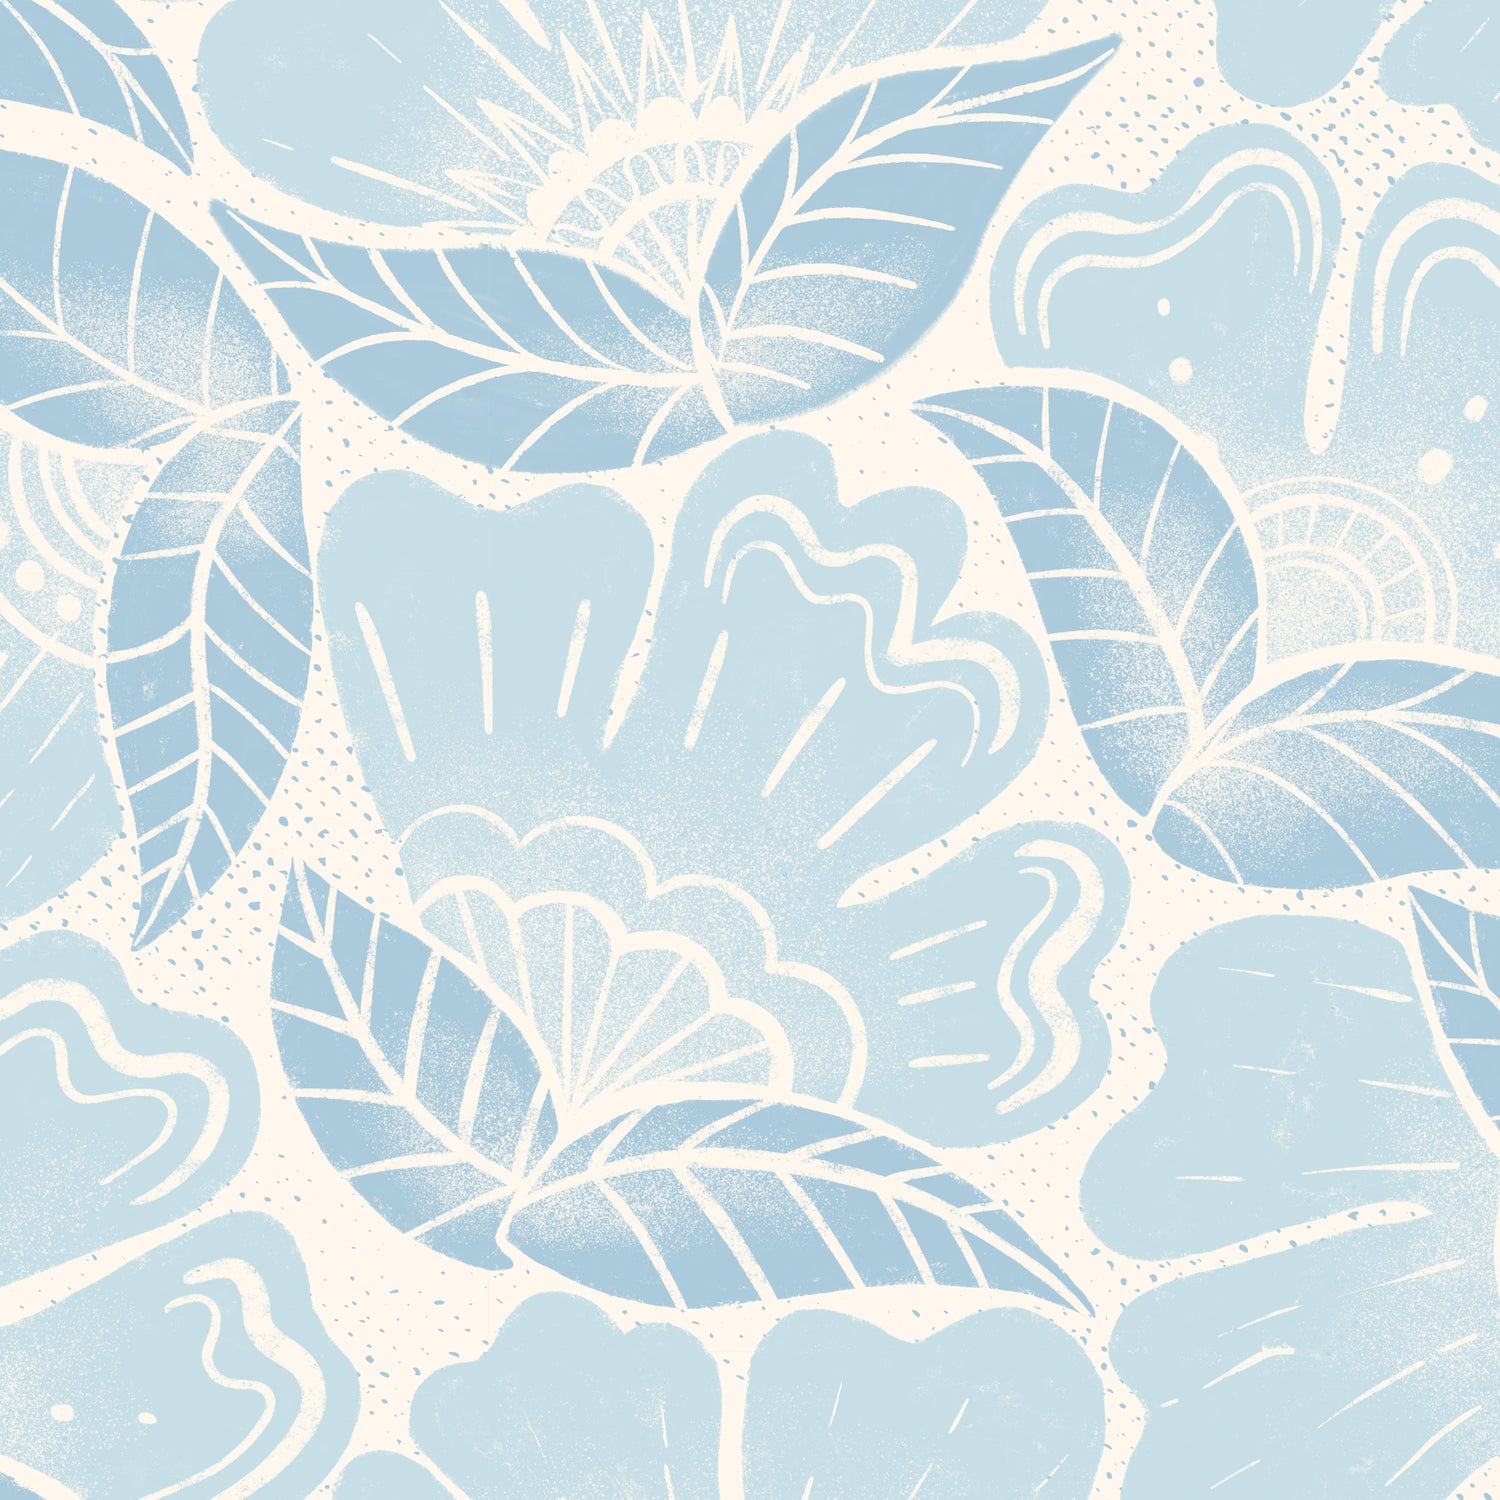 Scattered Flowers Wallpaper in Blue shown in a close up view.